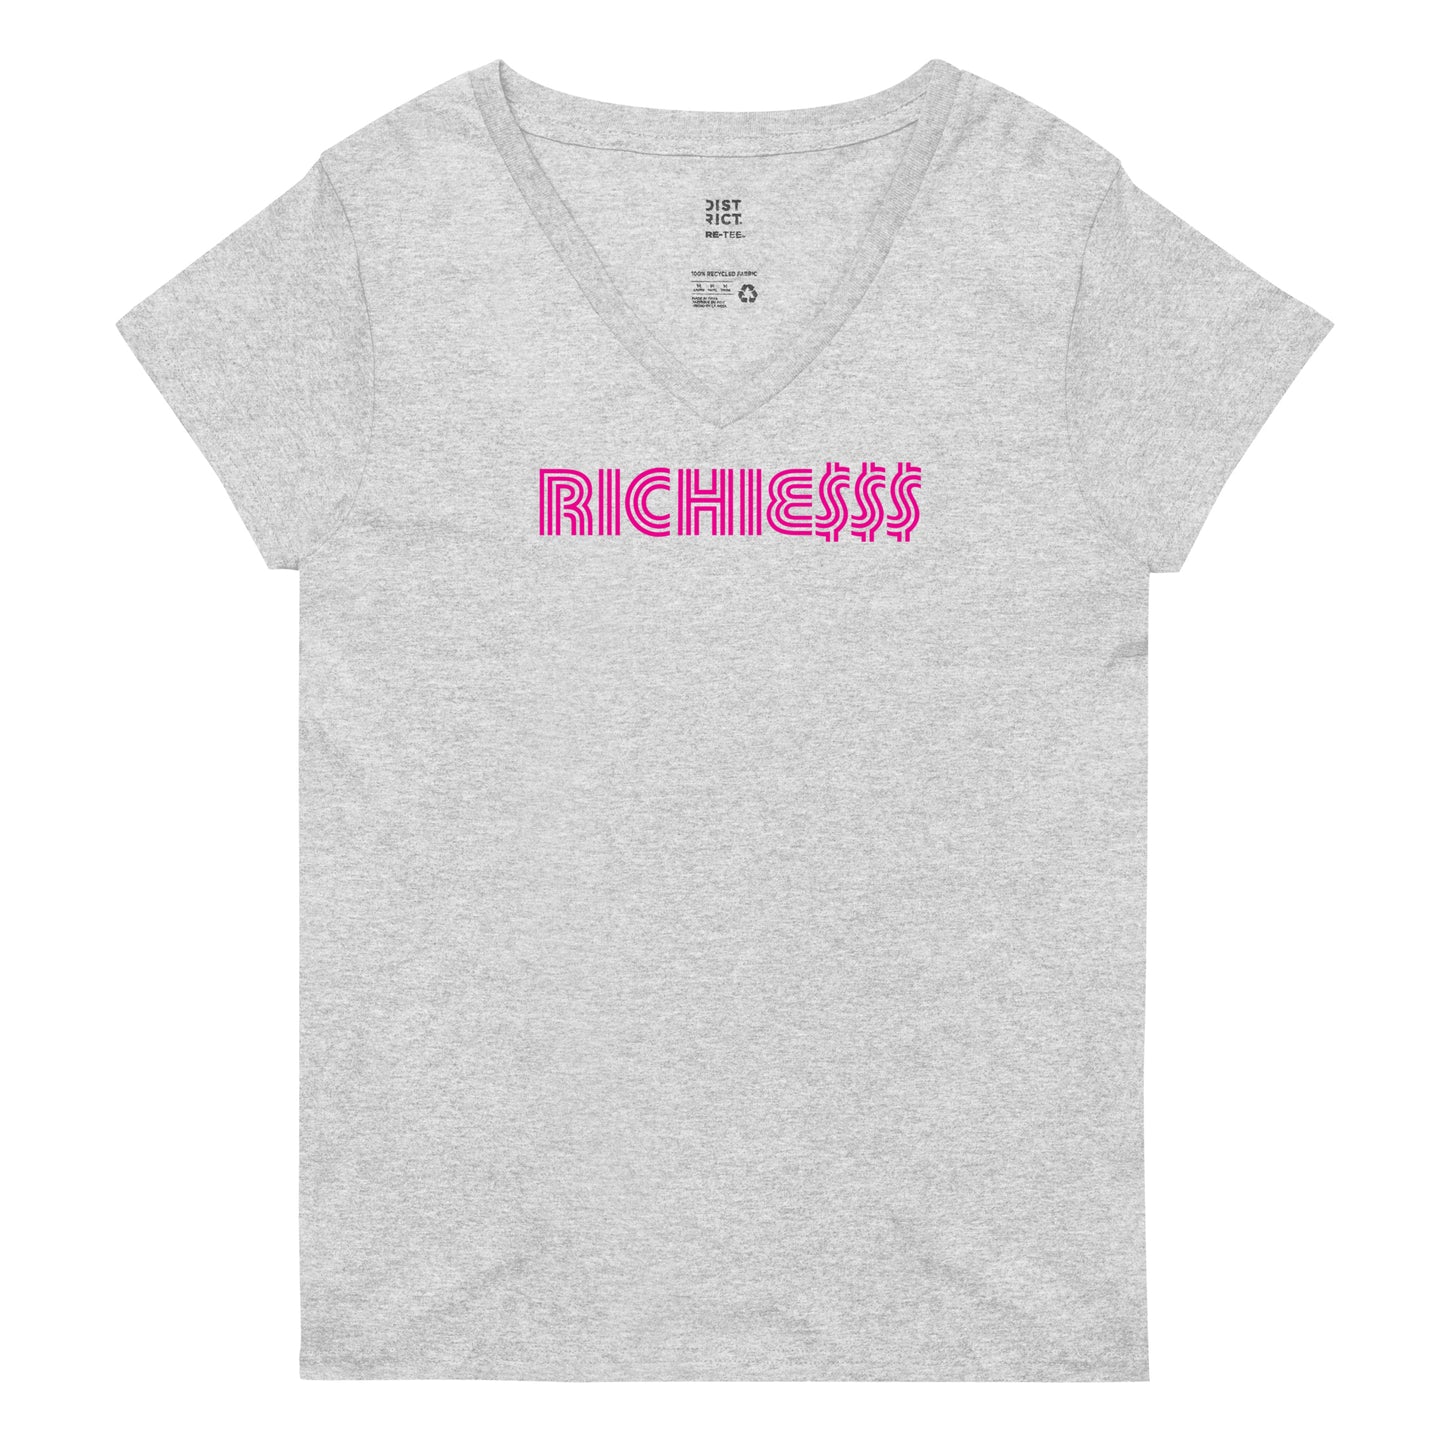 Even the Rich Richies Women's Recycled V-neck T-Shirt